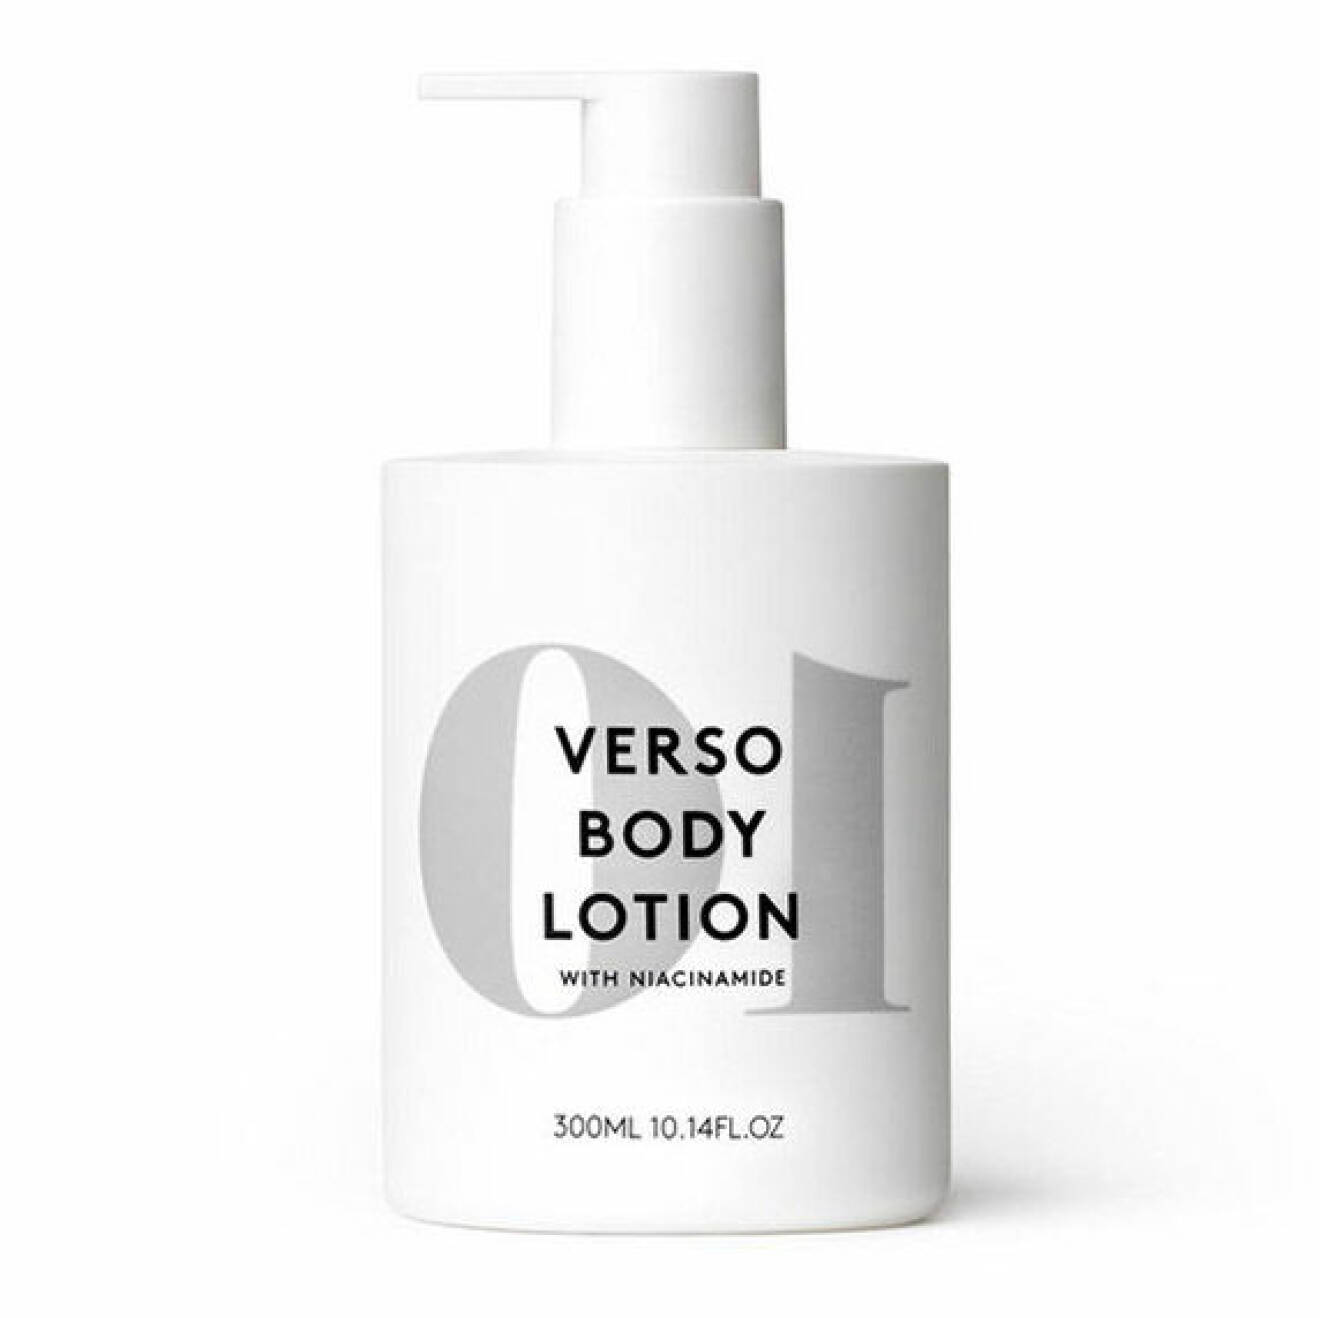 Verso Body Lotion with Niacinamide